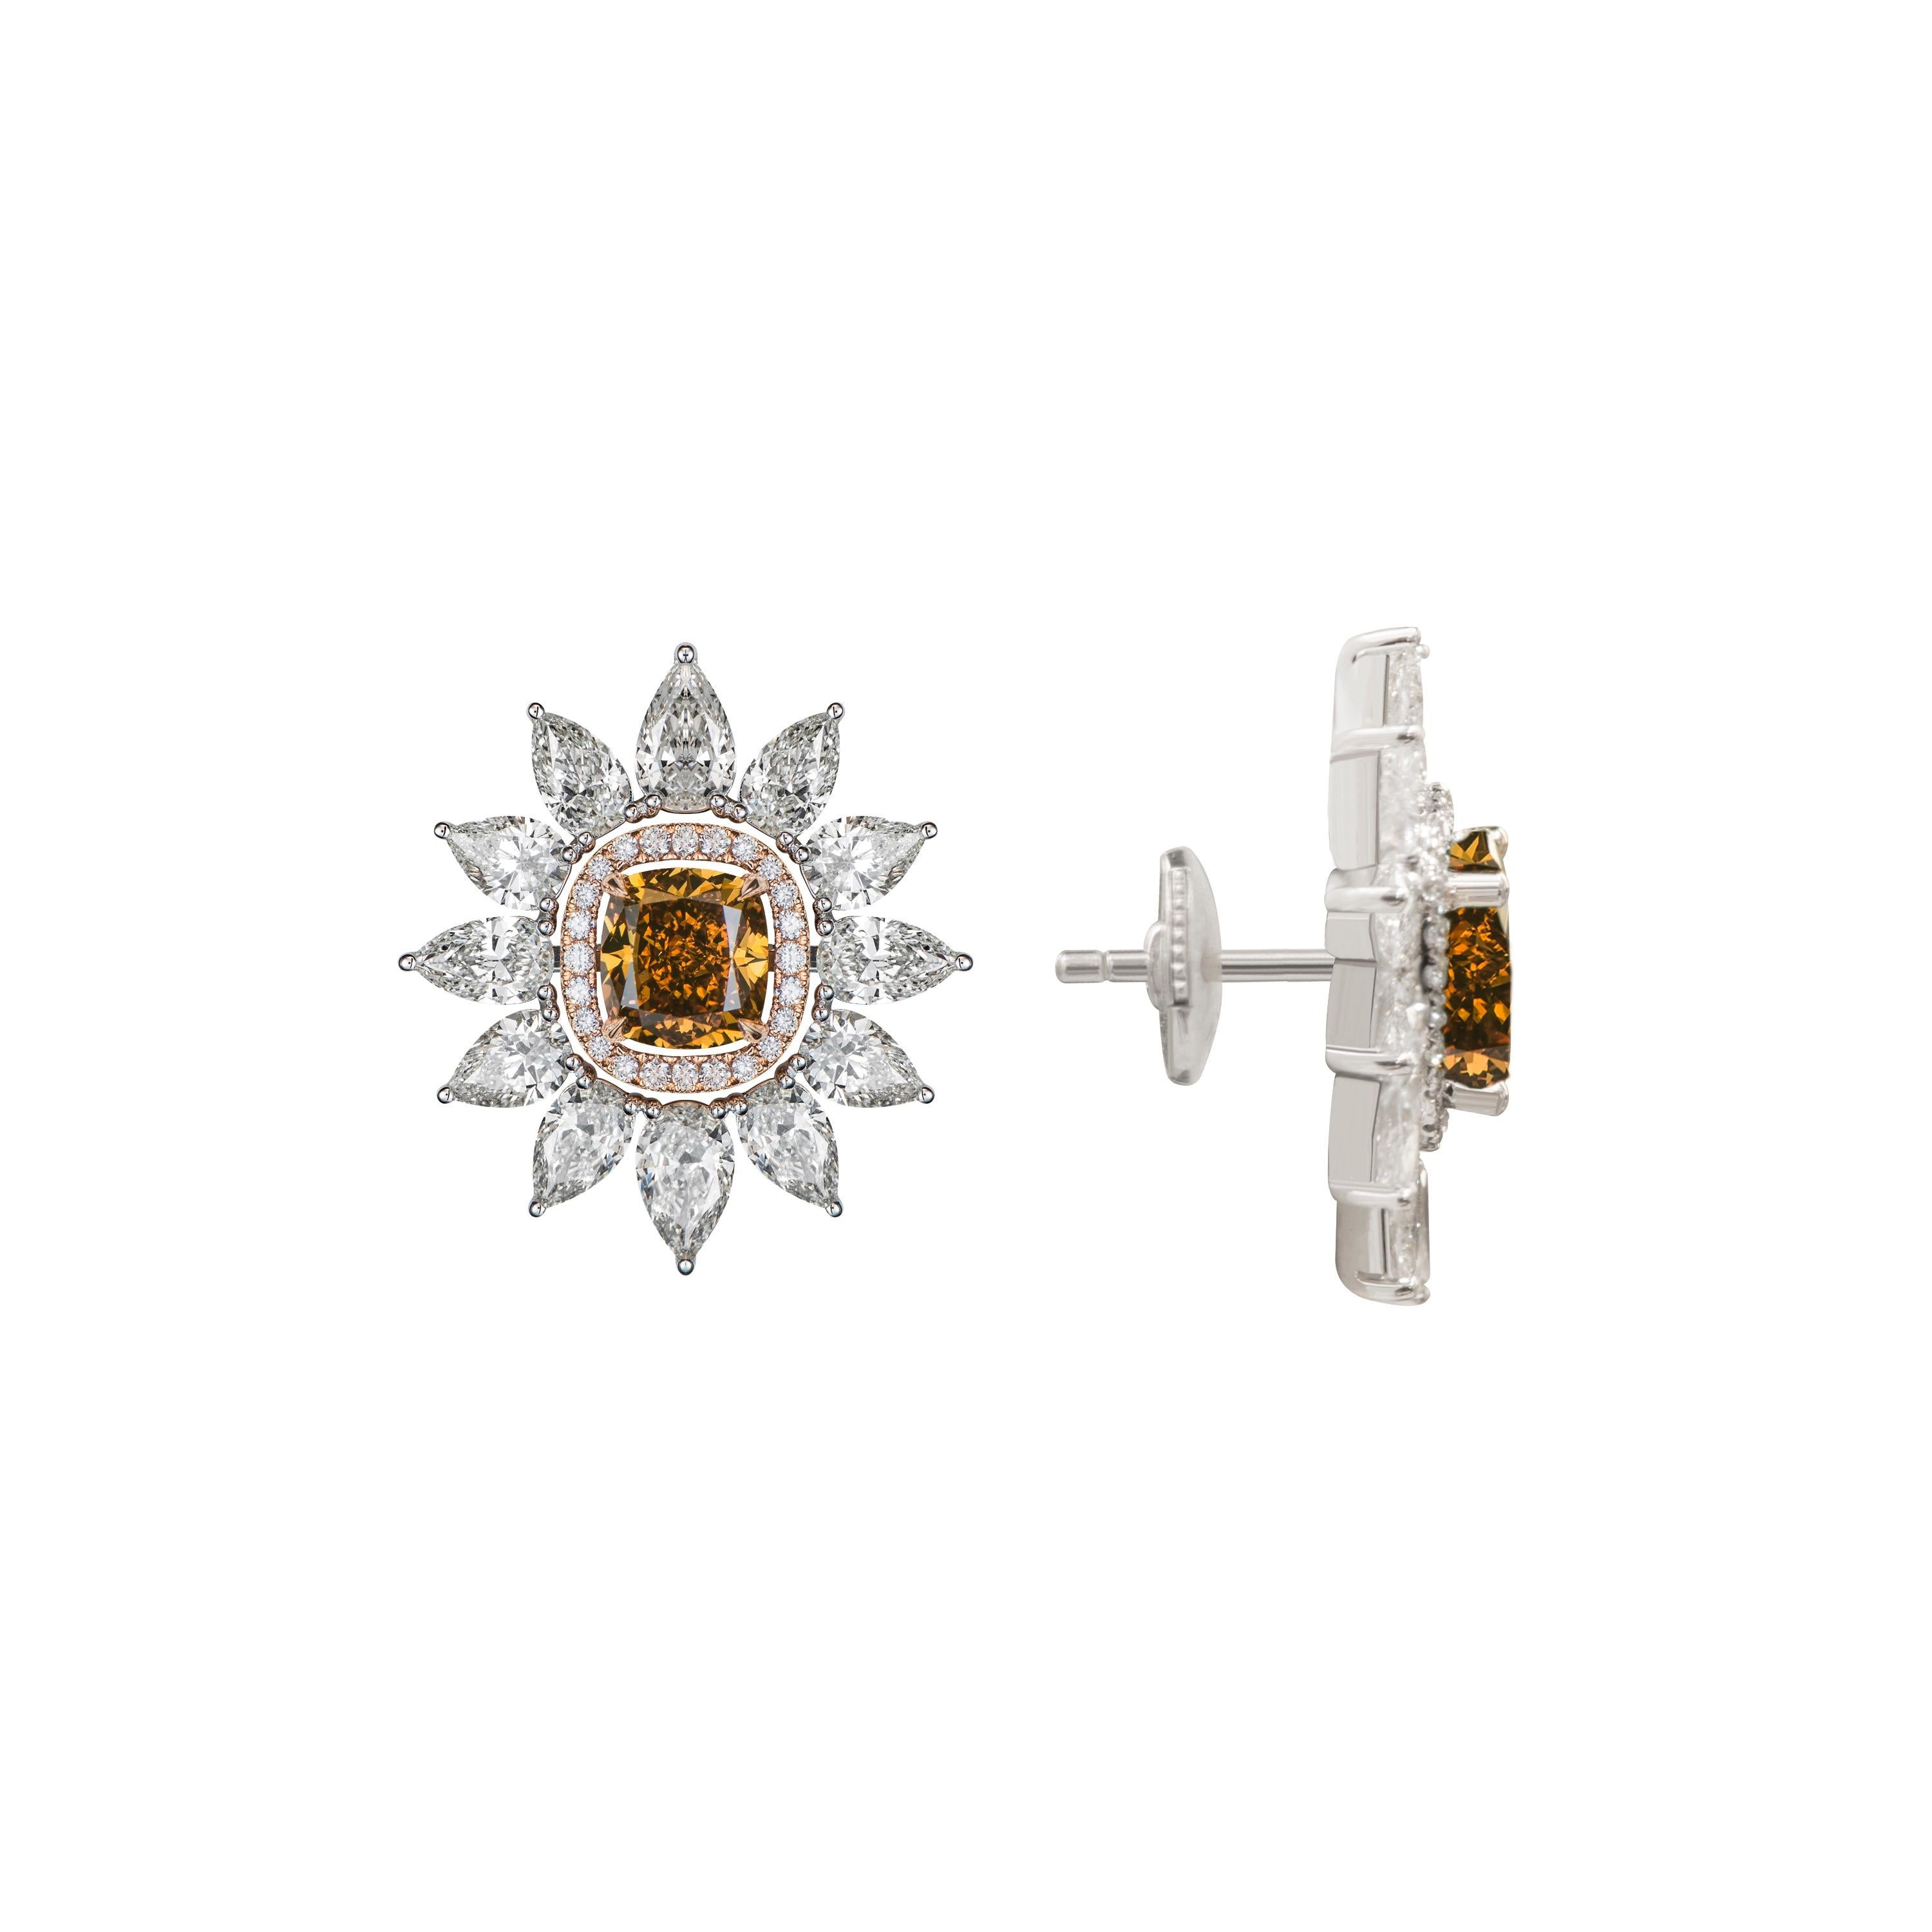 These innovative earrings allow you to wear them in two different combinations. The halo of pear shaped diamonds is detachable. The brown diamond solitaires in the center can be either worn by themselves or with the halo making this piece a